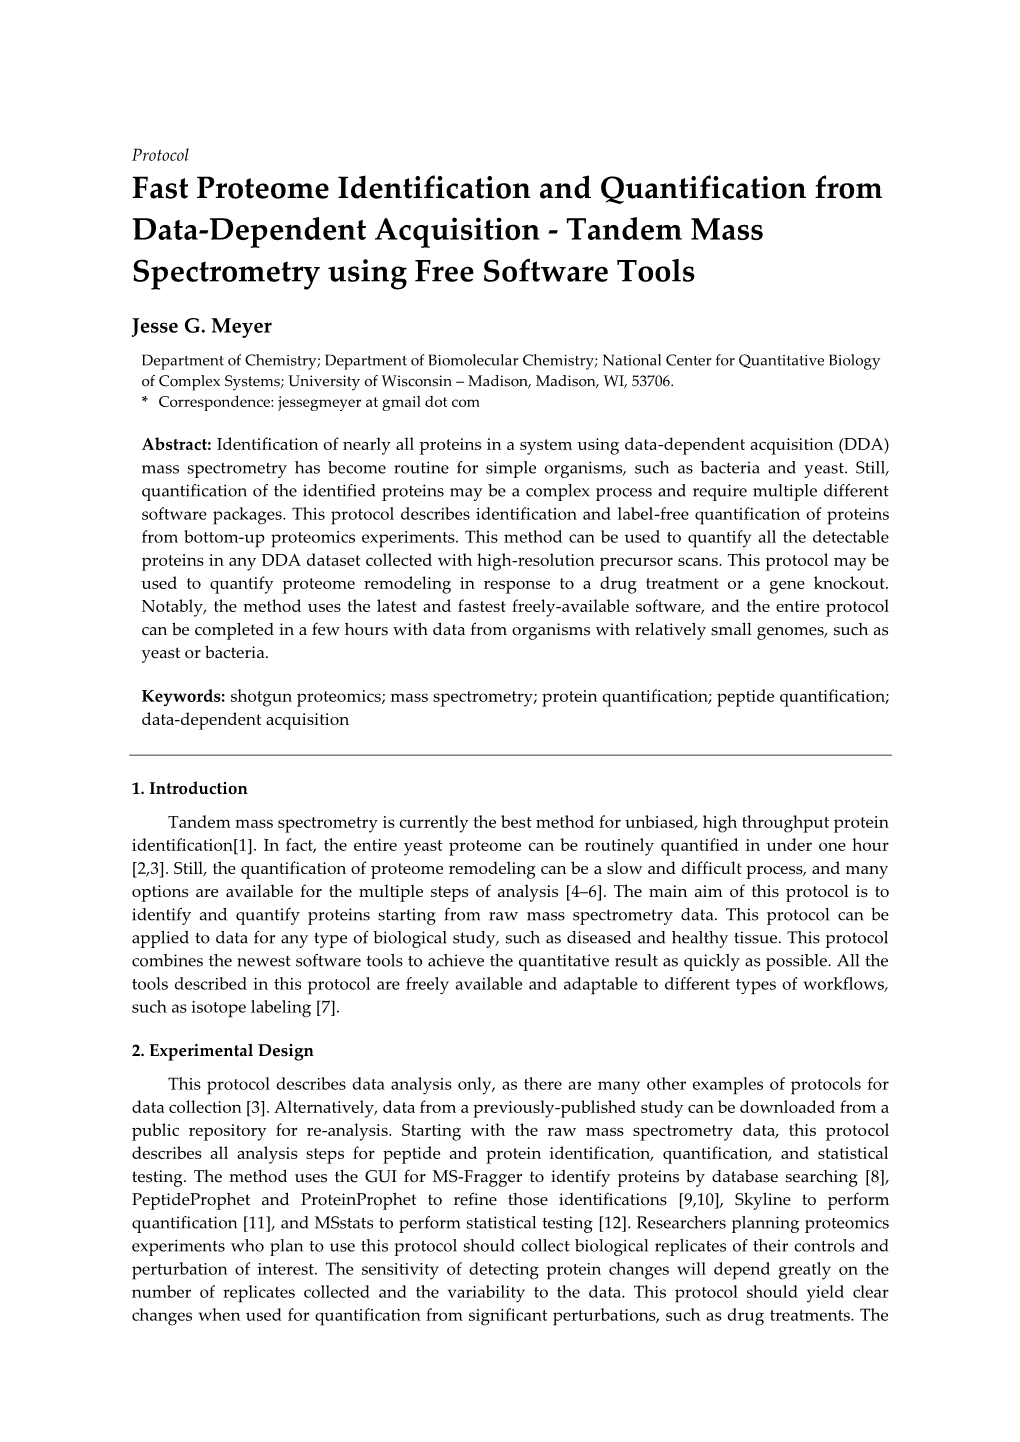 Tandem Mass Spectrometry Using Free Software Tools